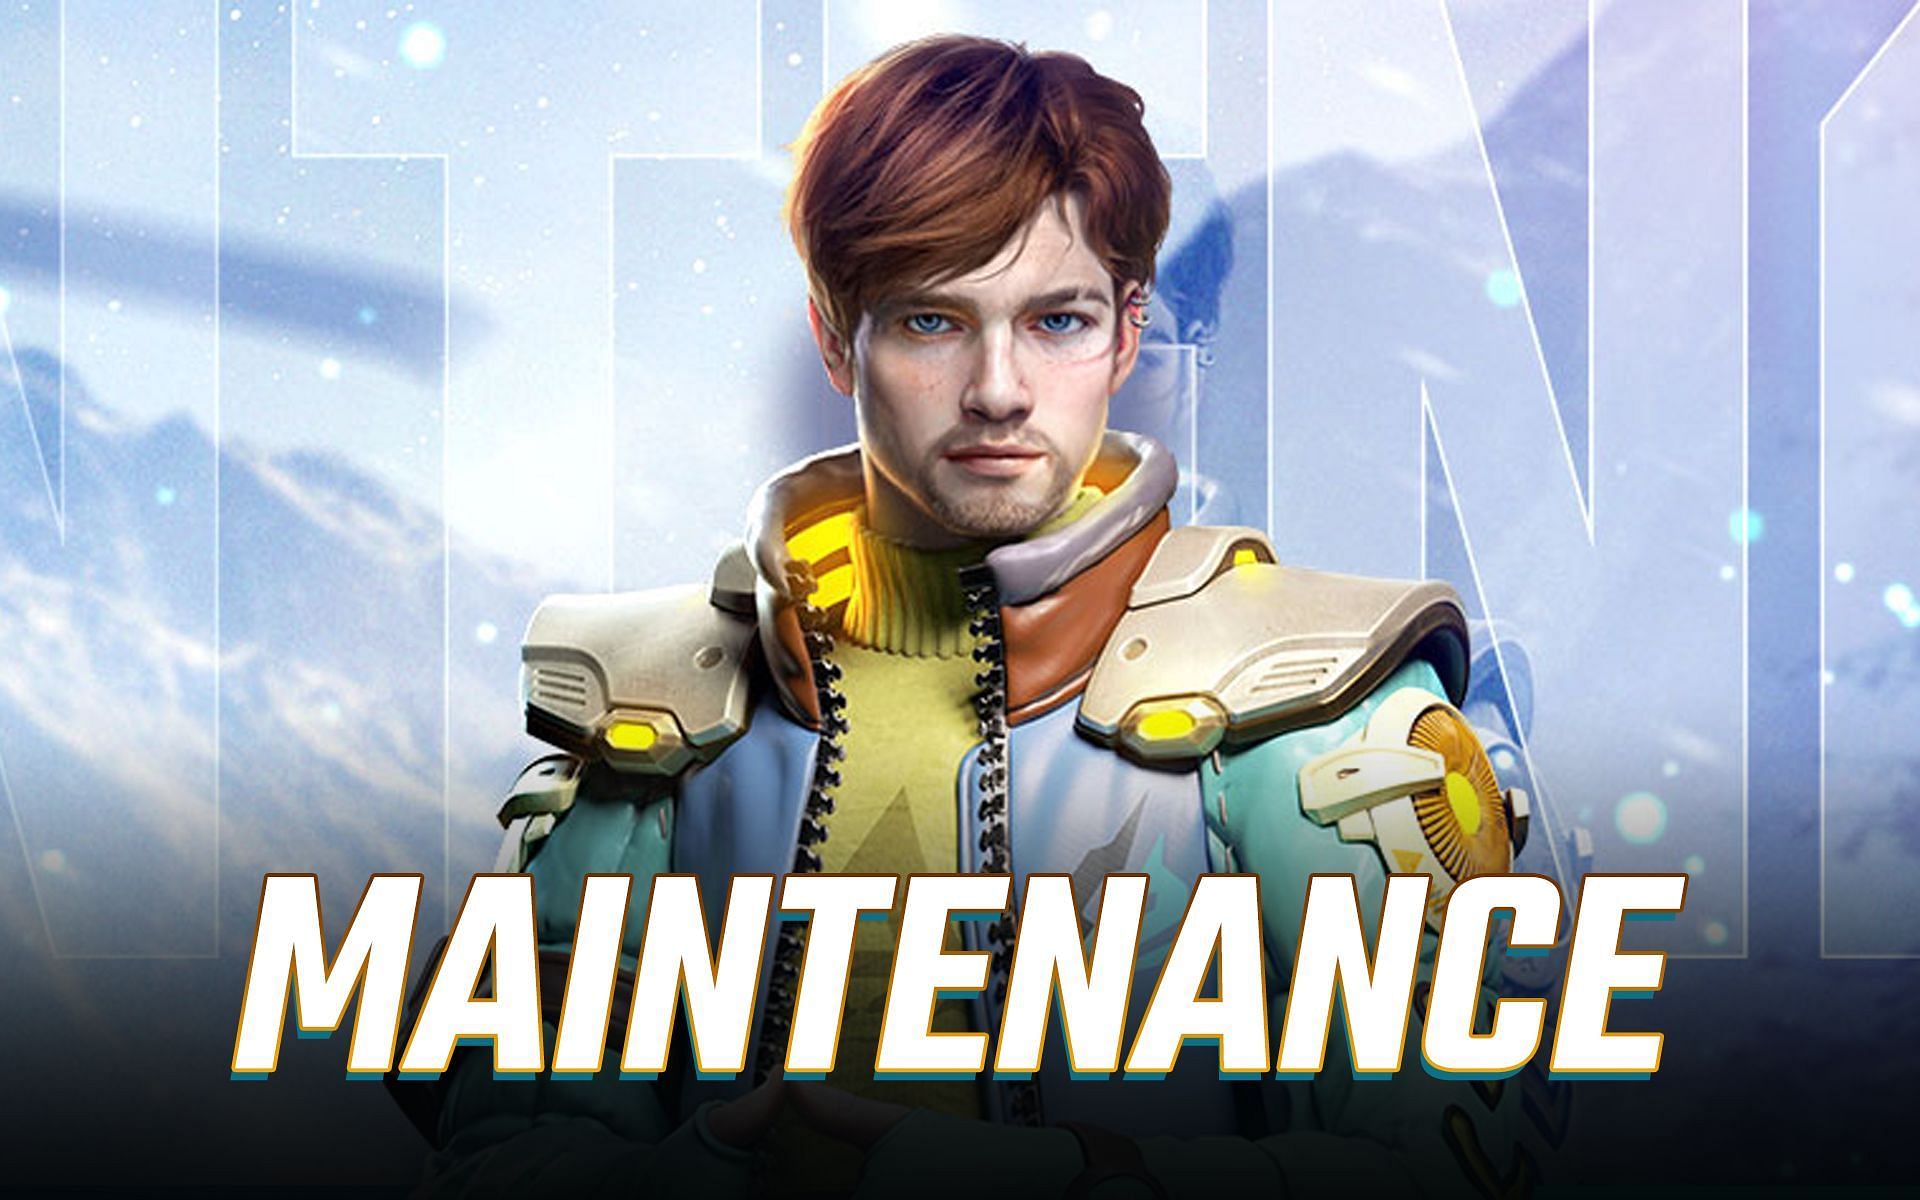 The maintenance time has commenced in the battle royale game (Image via Sportskeeda)